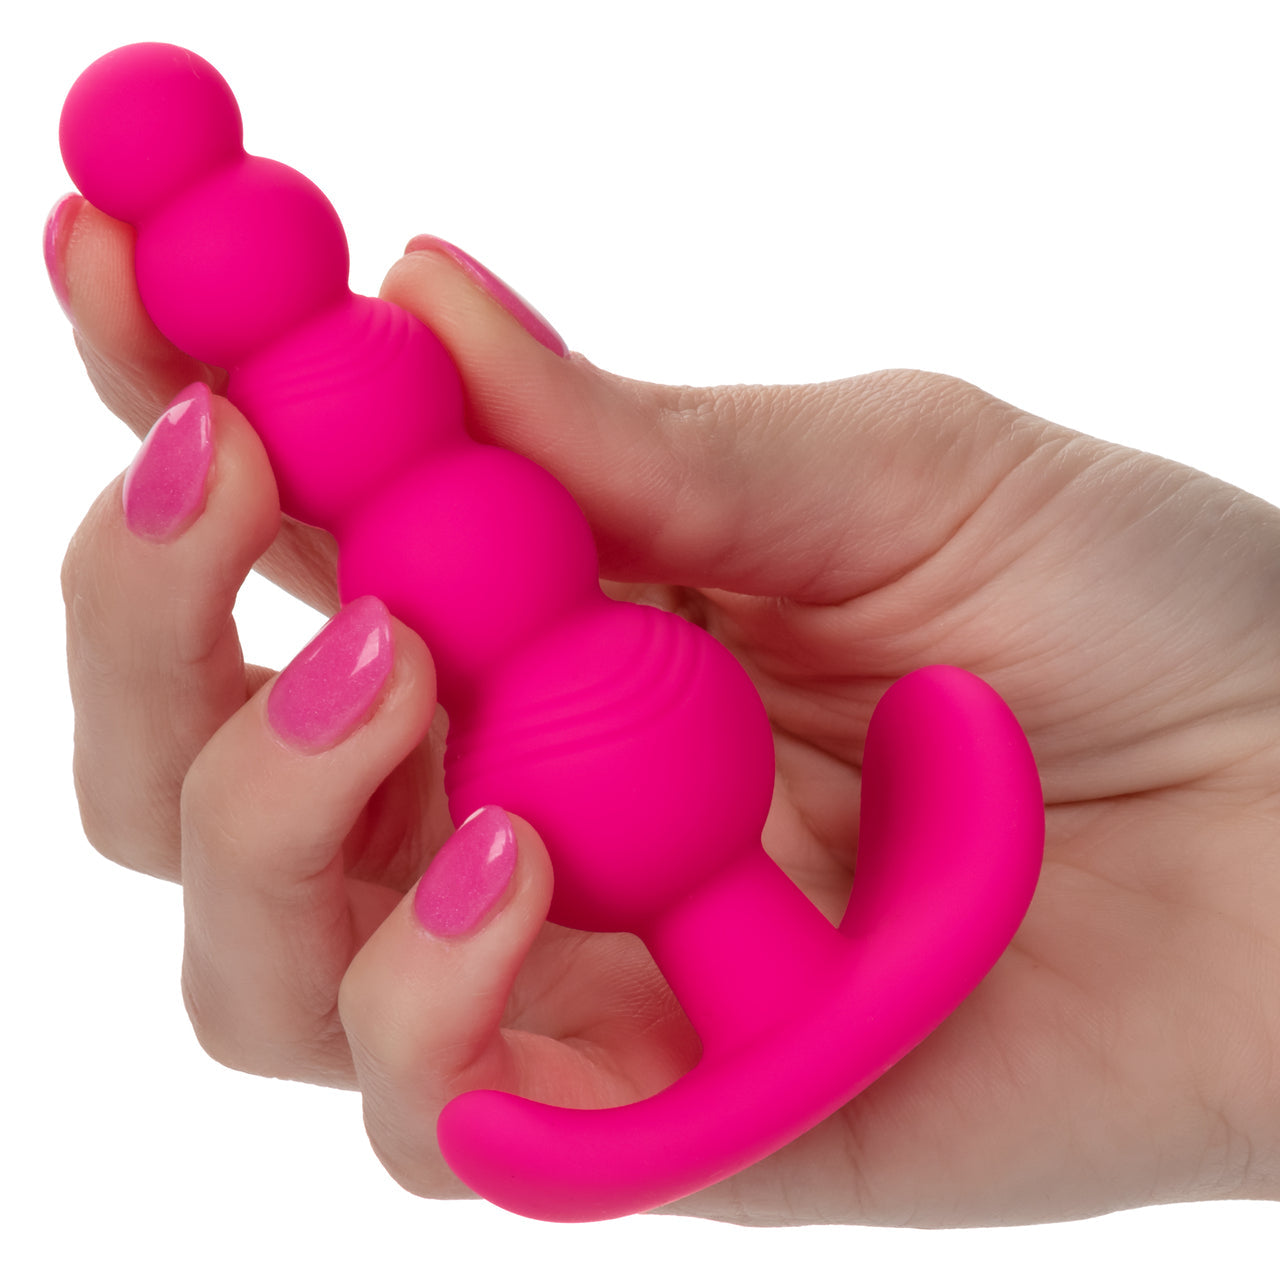 Cheeky X-5 Beads - Thorn & Feather Sex Toy Canada